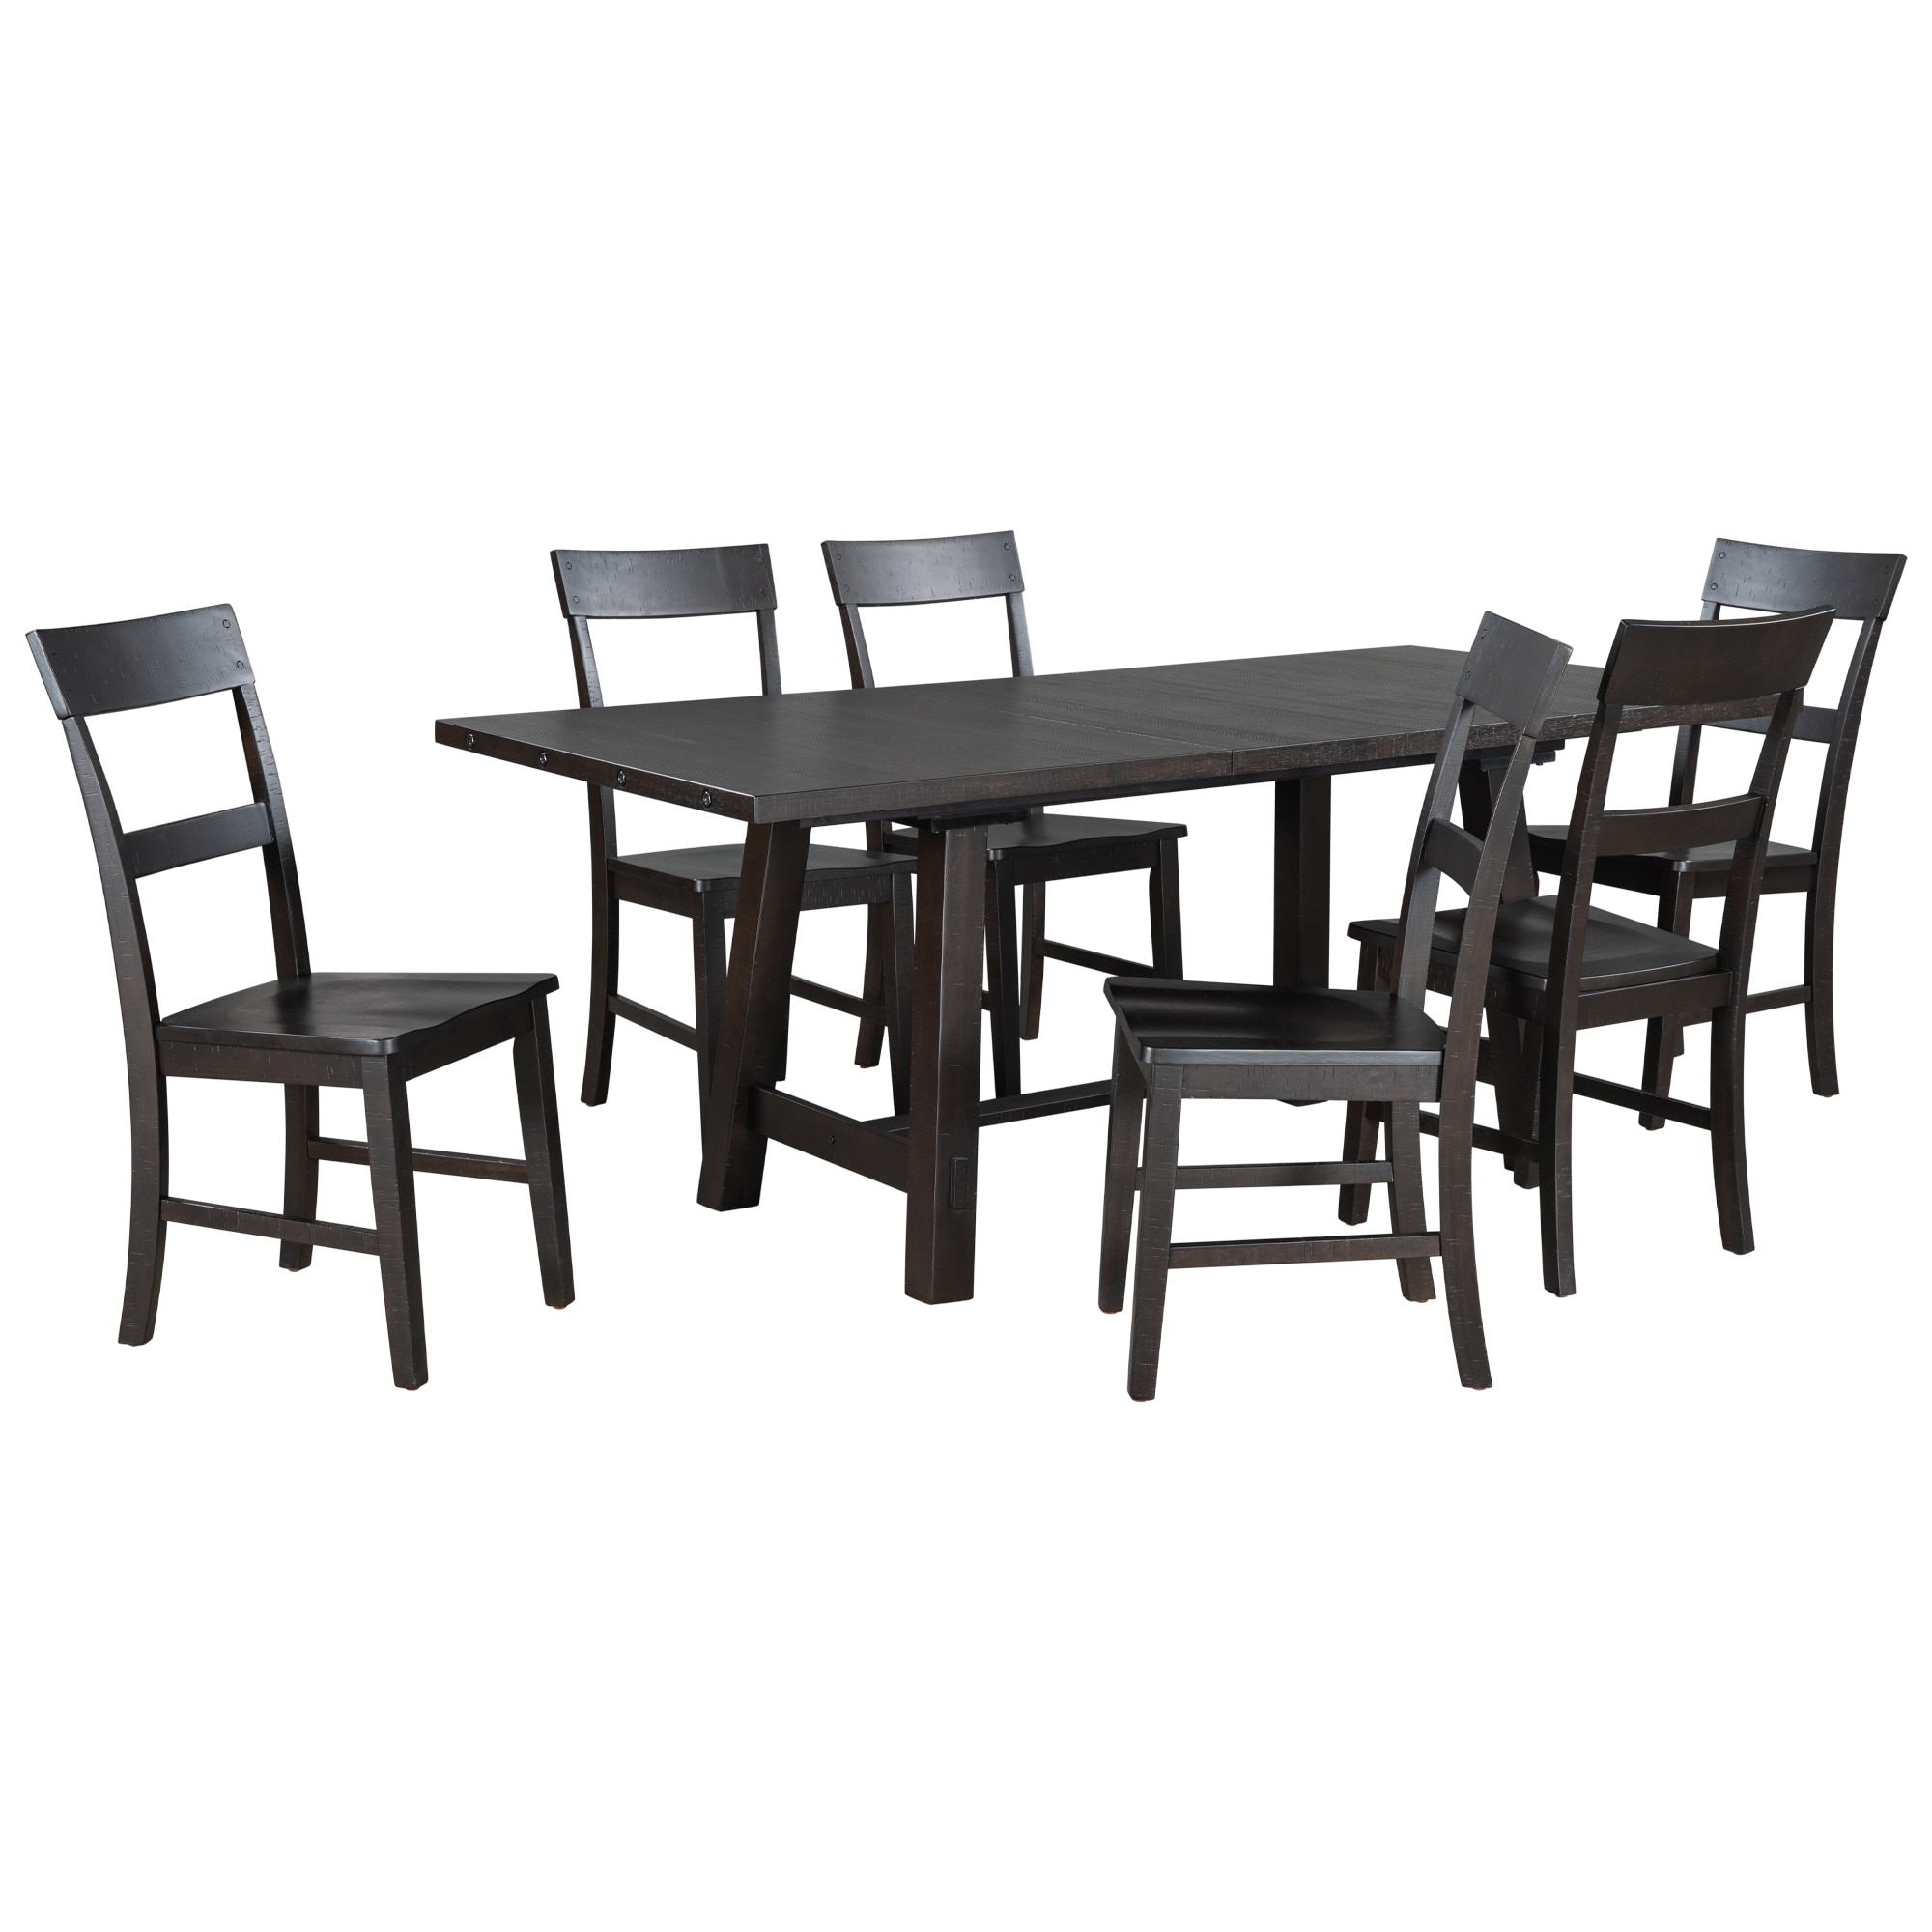 7-Piece Dining Table Set Bistro Set with Extendable Table, Wooden Table and Chairs Set with 18" Leaf and 6 Curved Back Chairs